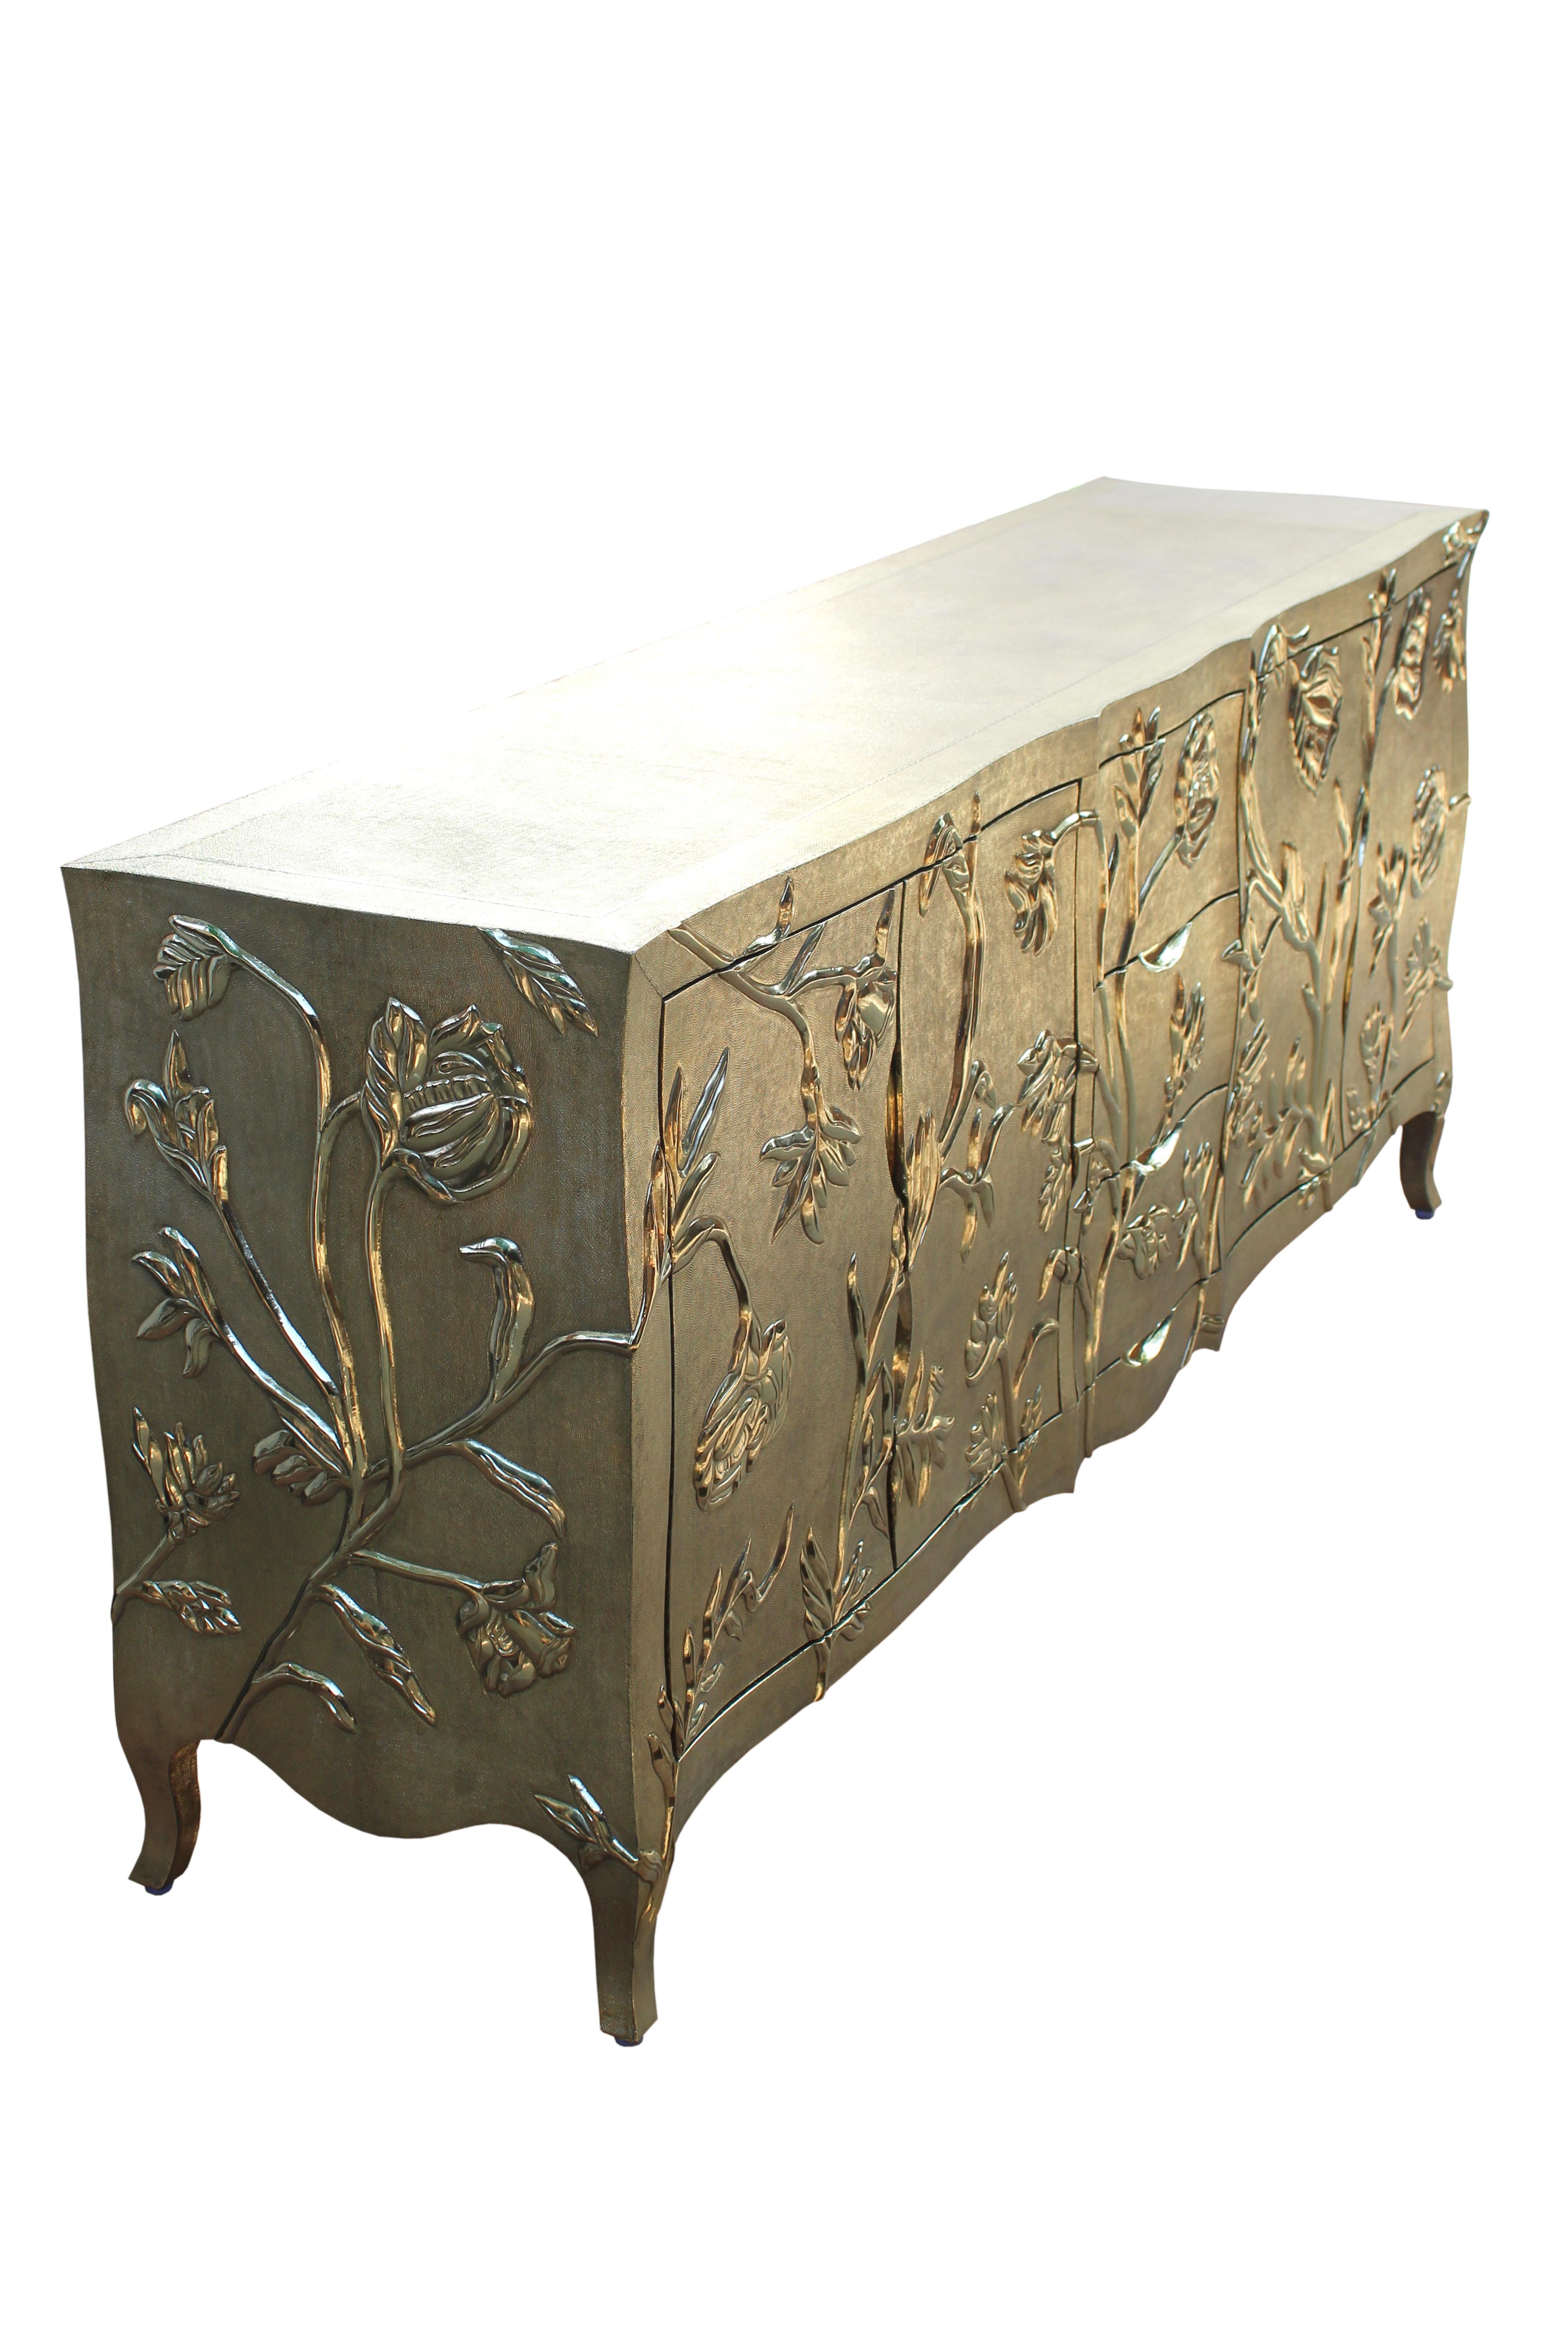 Indian Louise Floral Credenza in Brass Clad Over Wood Handcrafted in India For Sale